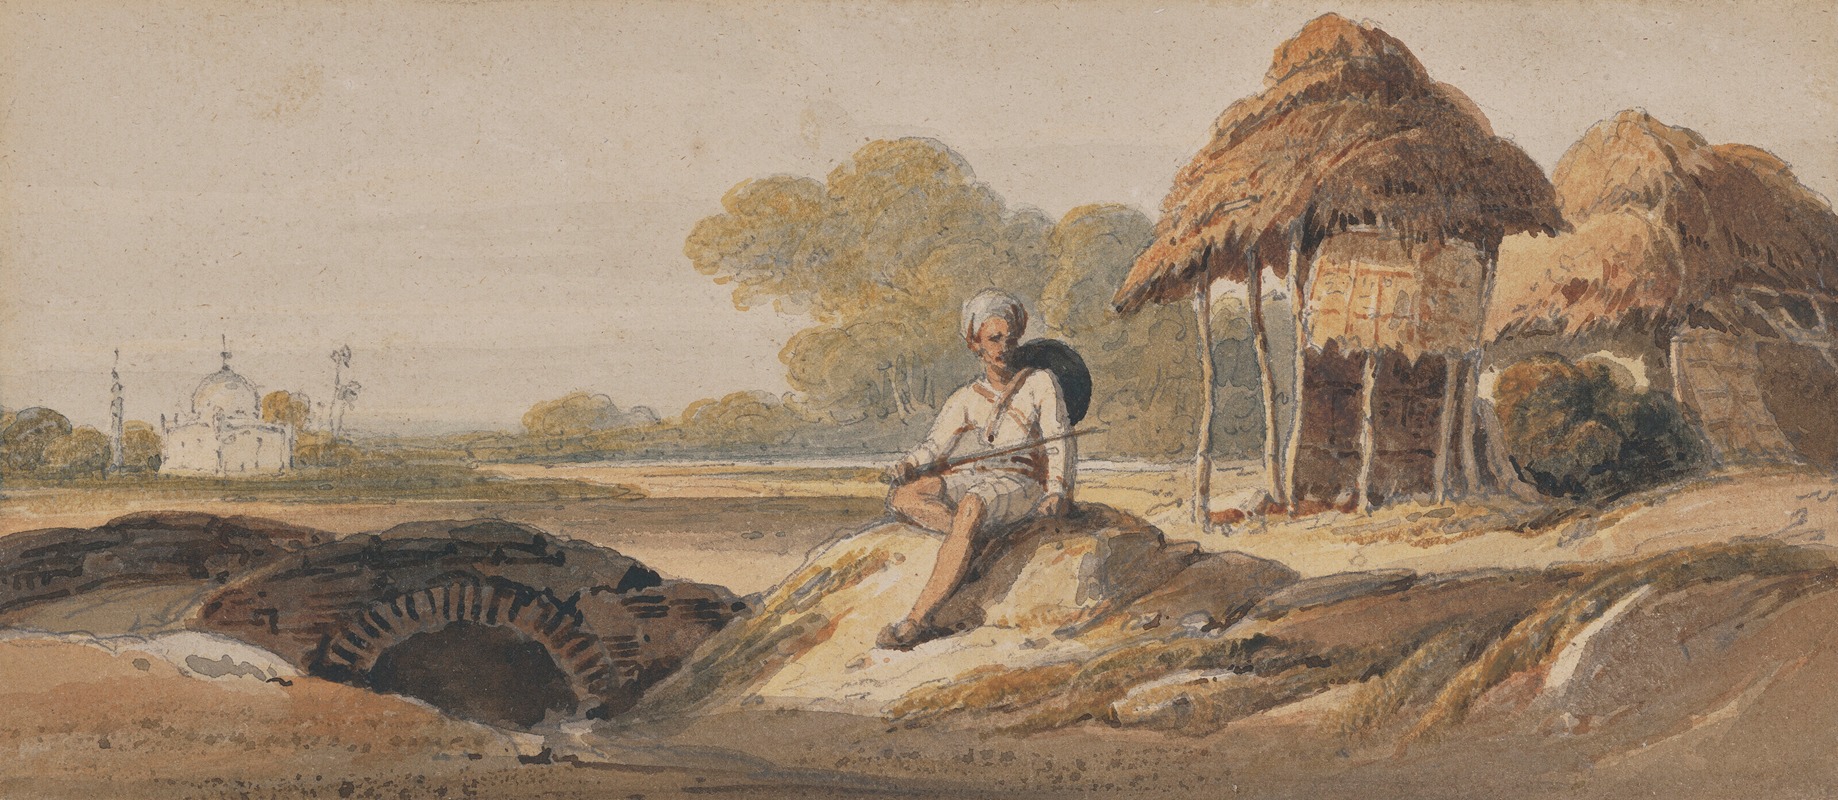 George Chinnery - Bengal landscape with a soldier and a distant shrine